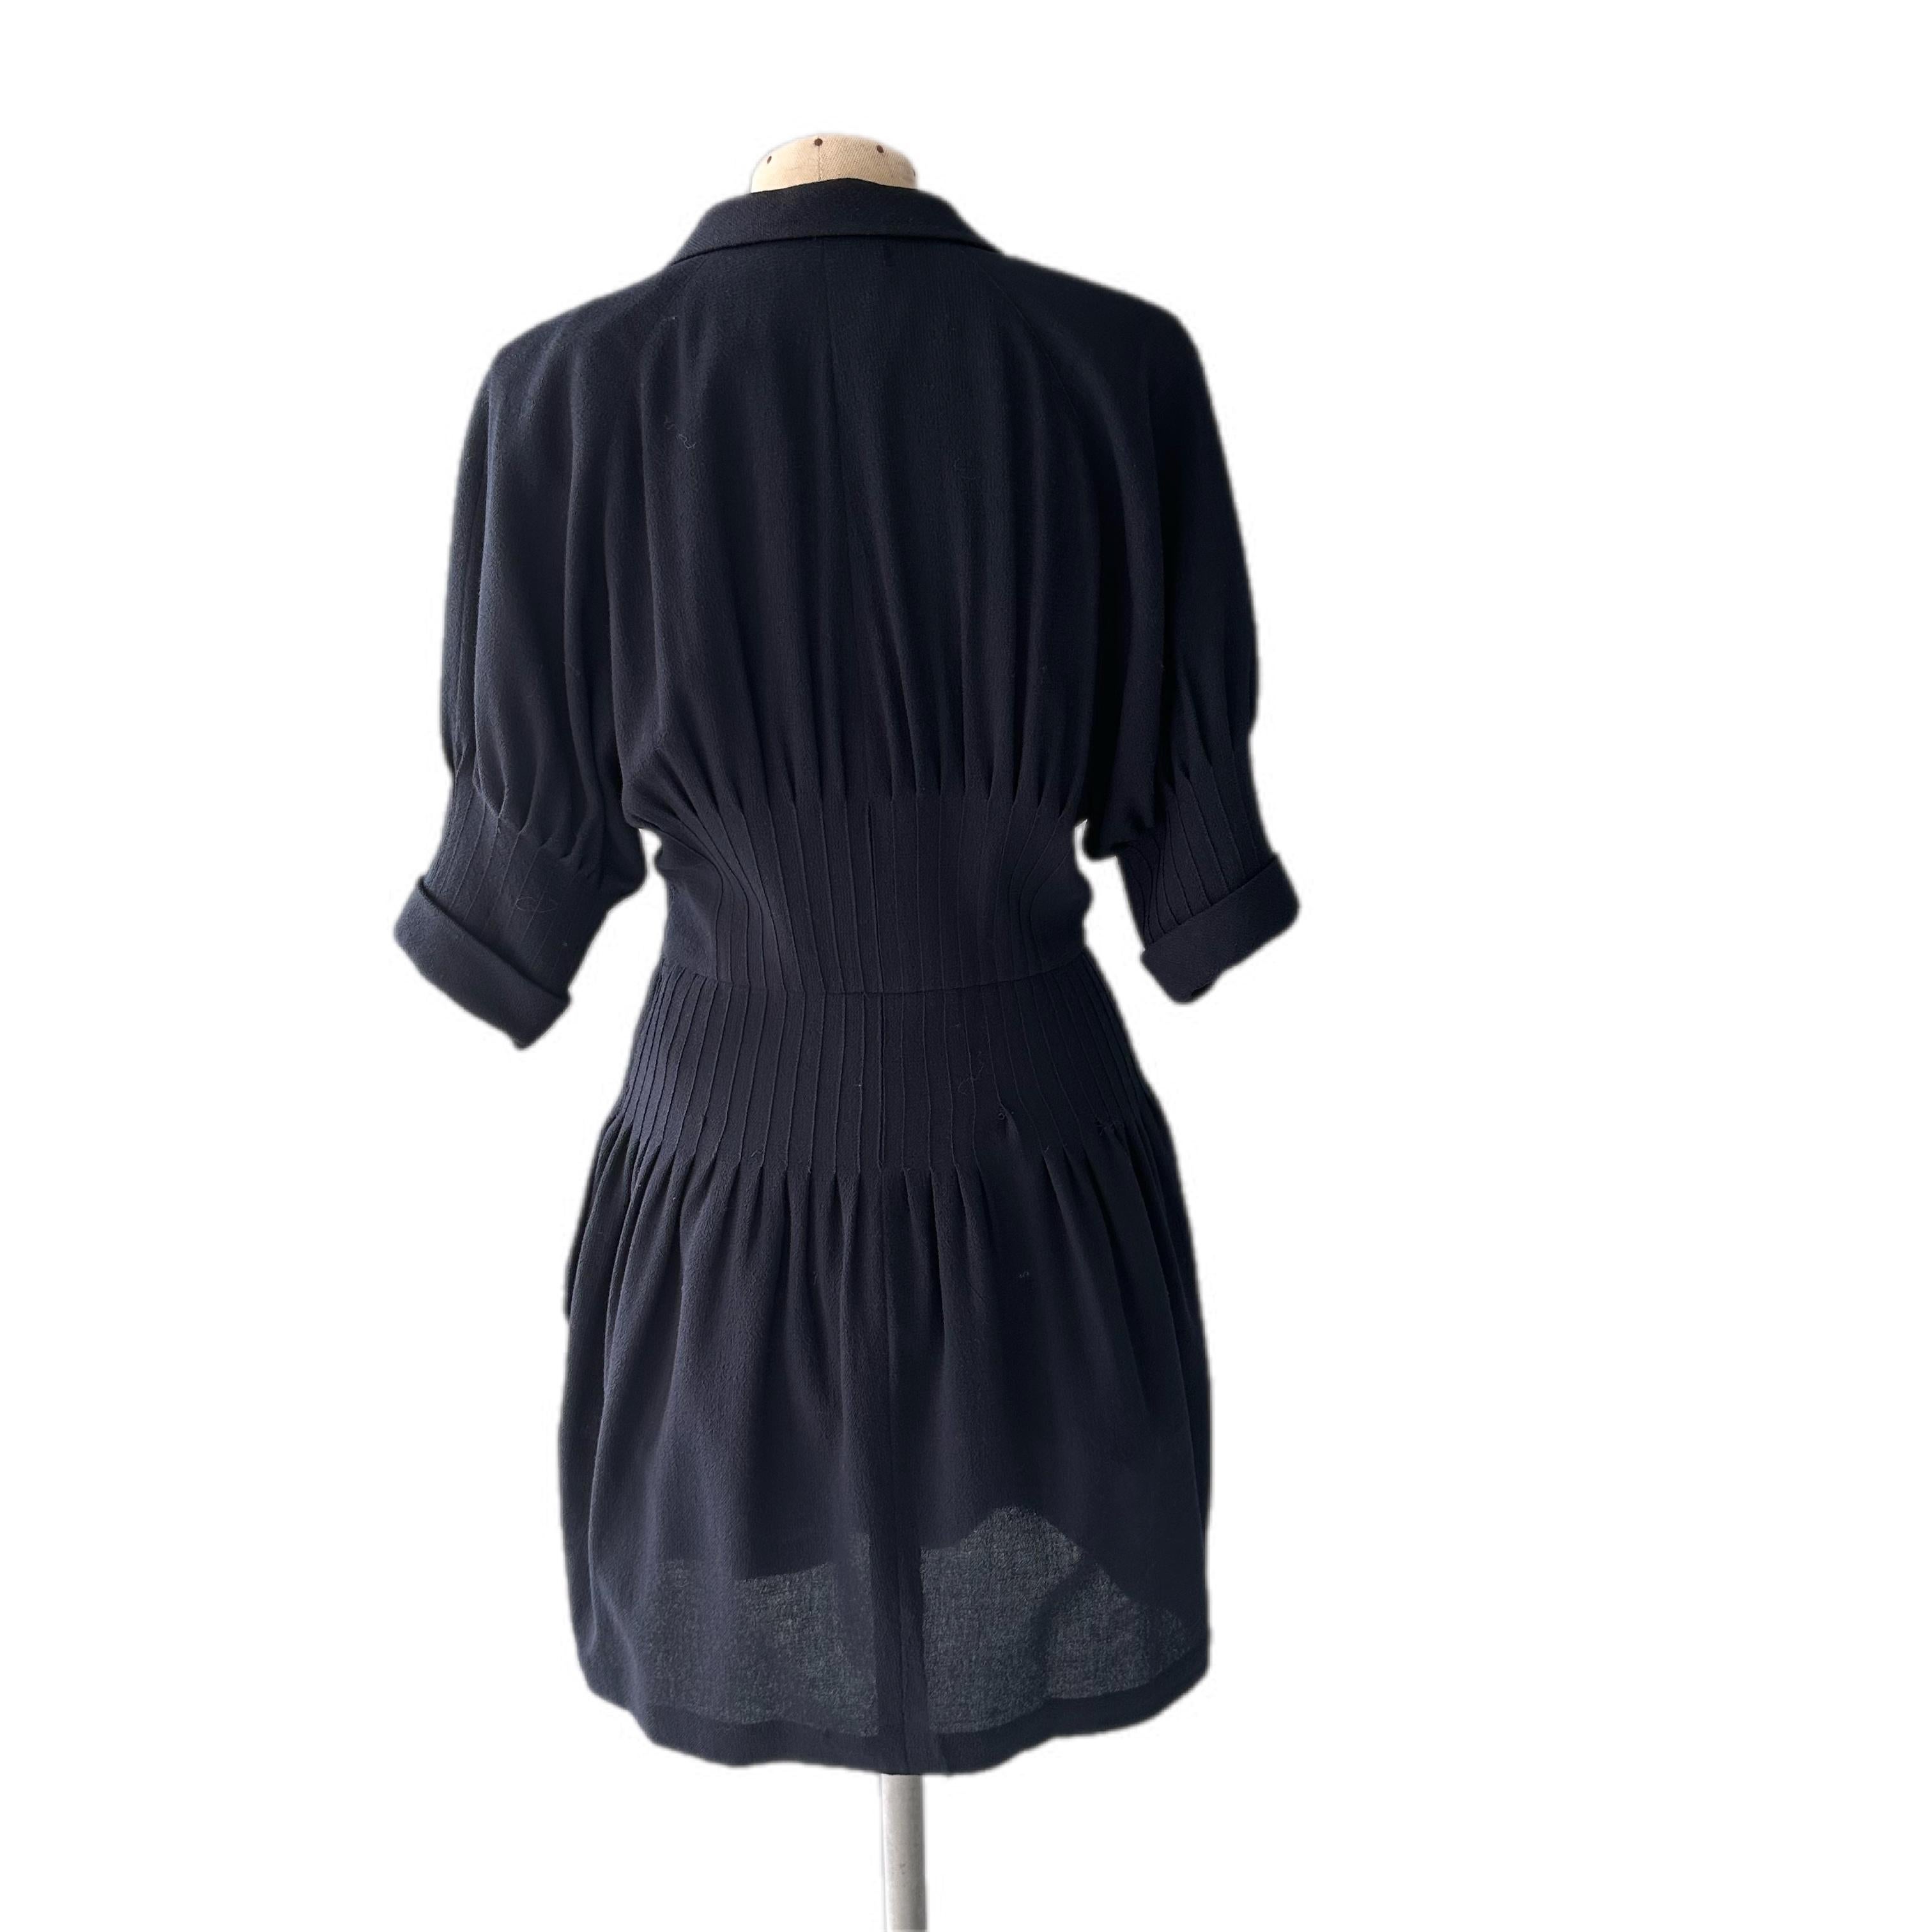 Versatile and elegant vintage Chanel dress 
Hook-and-eye closure at front, with half sleeve. The dress streaks at the waist to outline the shape and create a perfect shilouette.
Side pockets, composition label has been removed but looks like